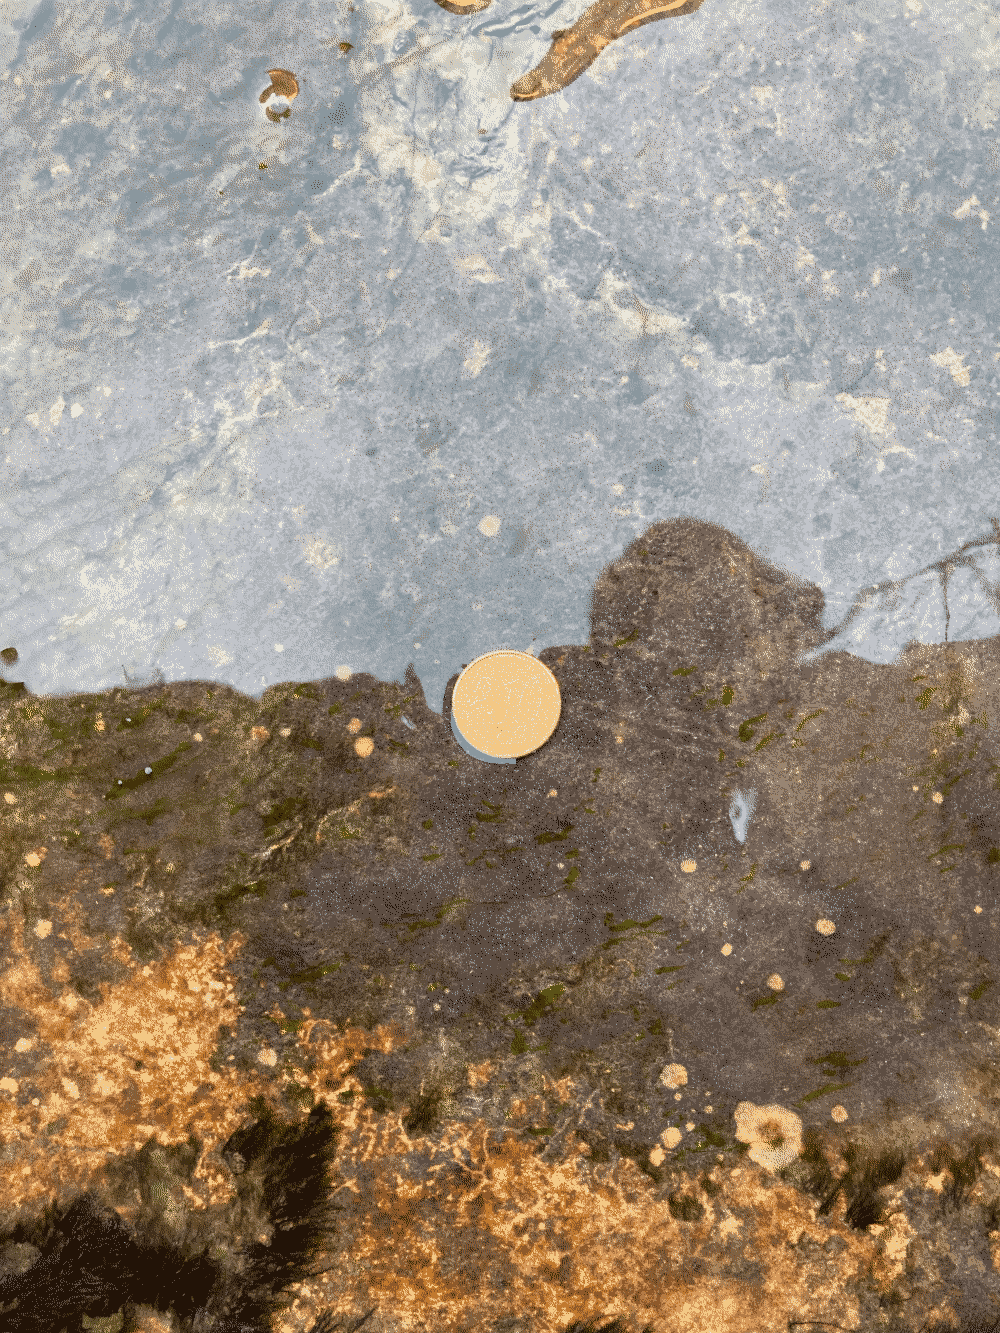 A coin sits an inch underwater on a stone step.